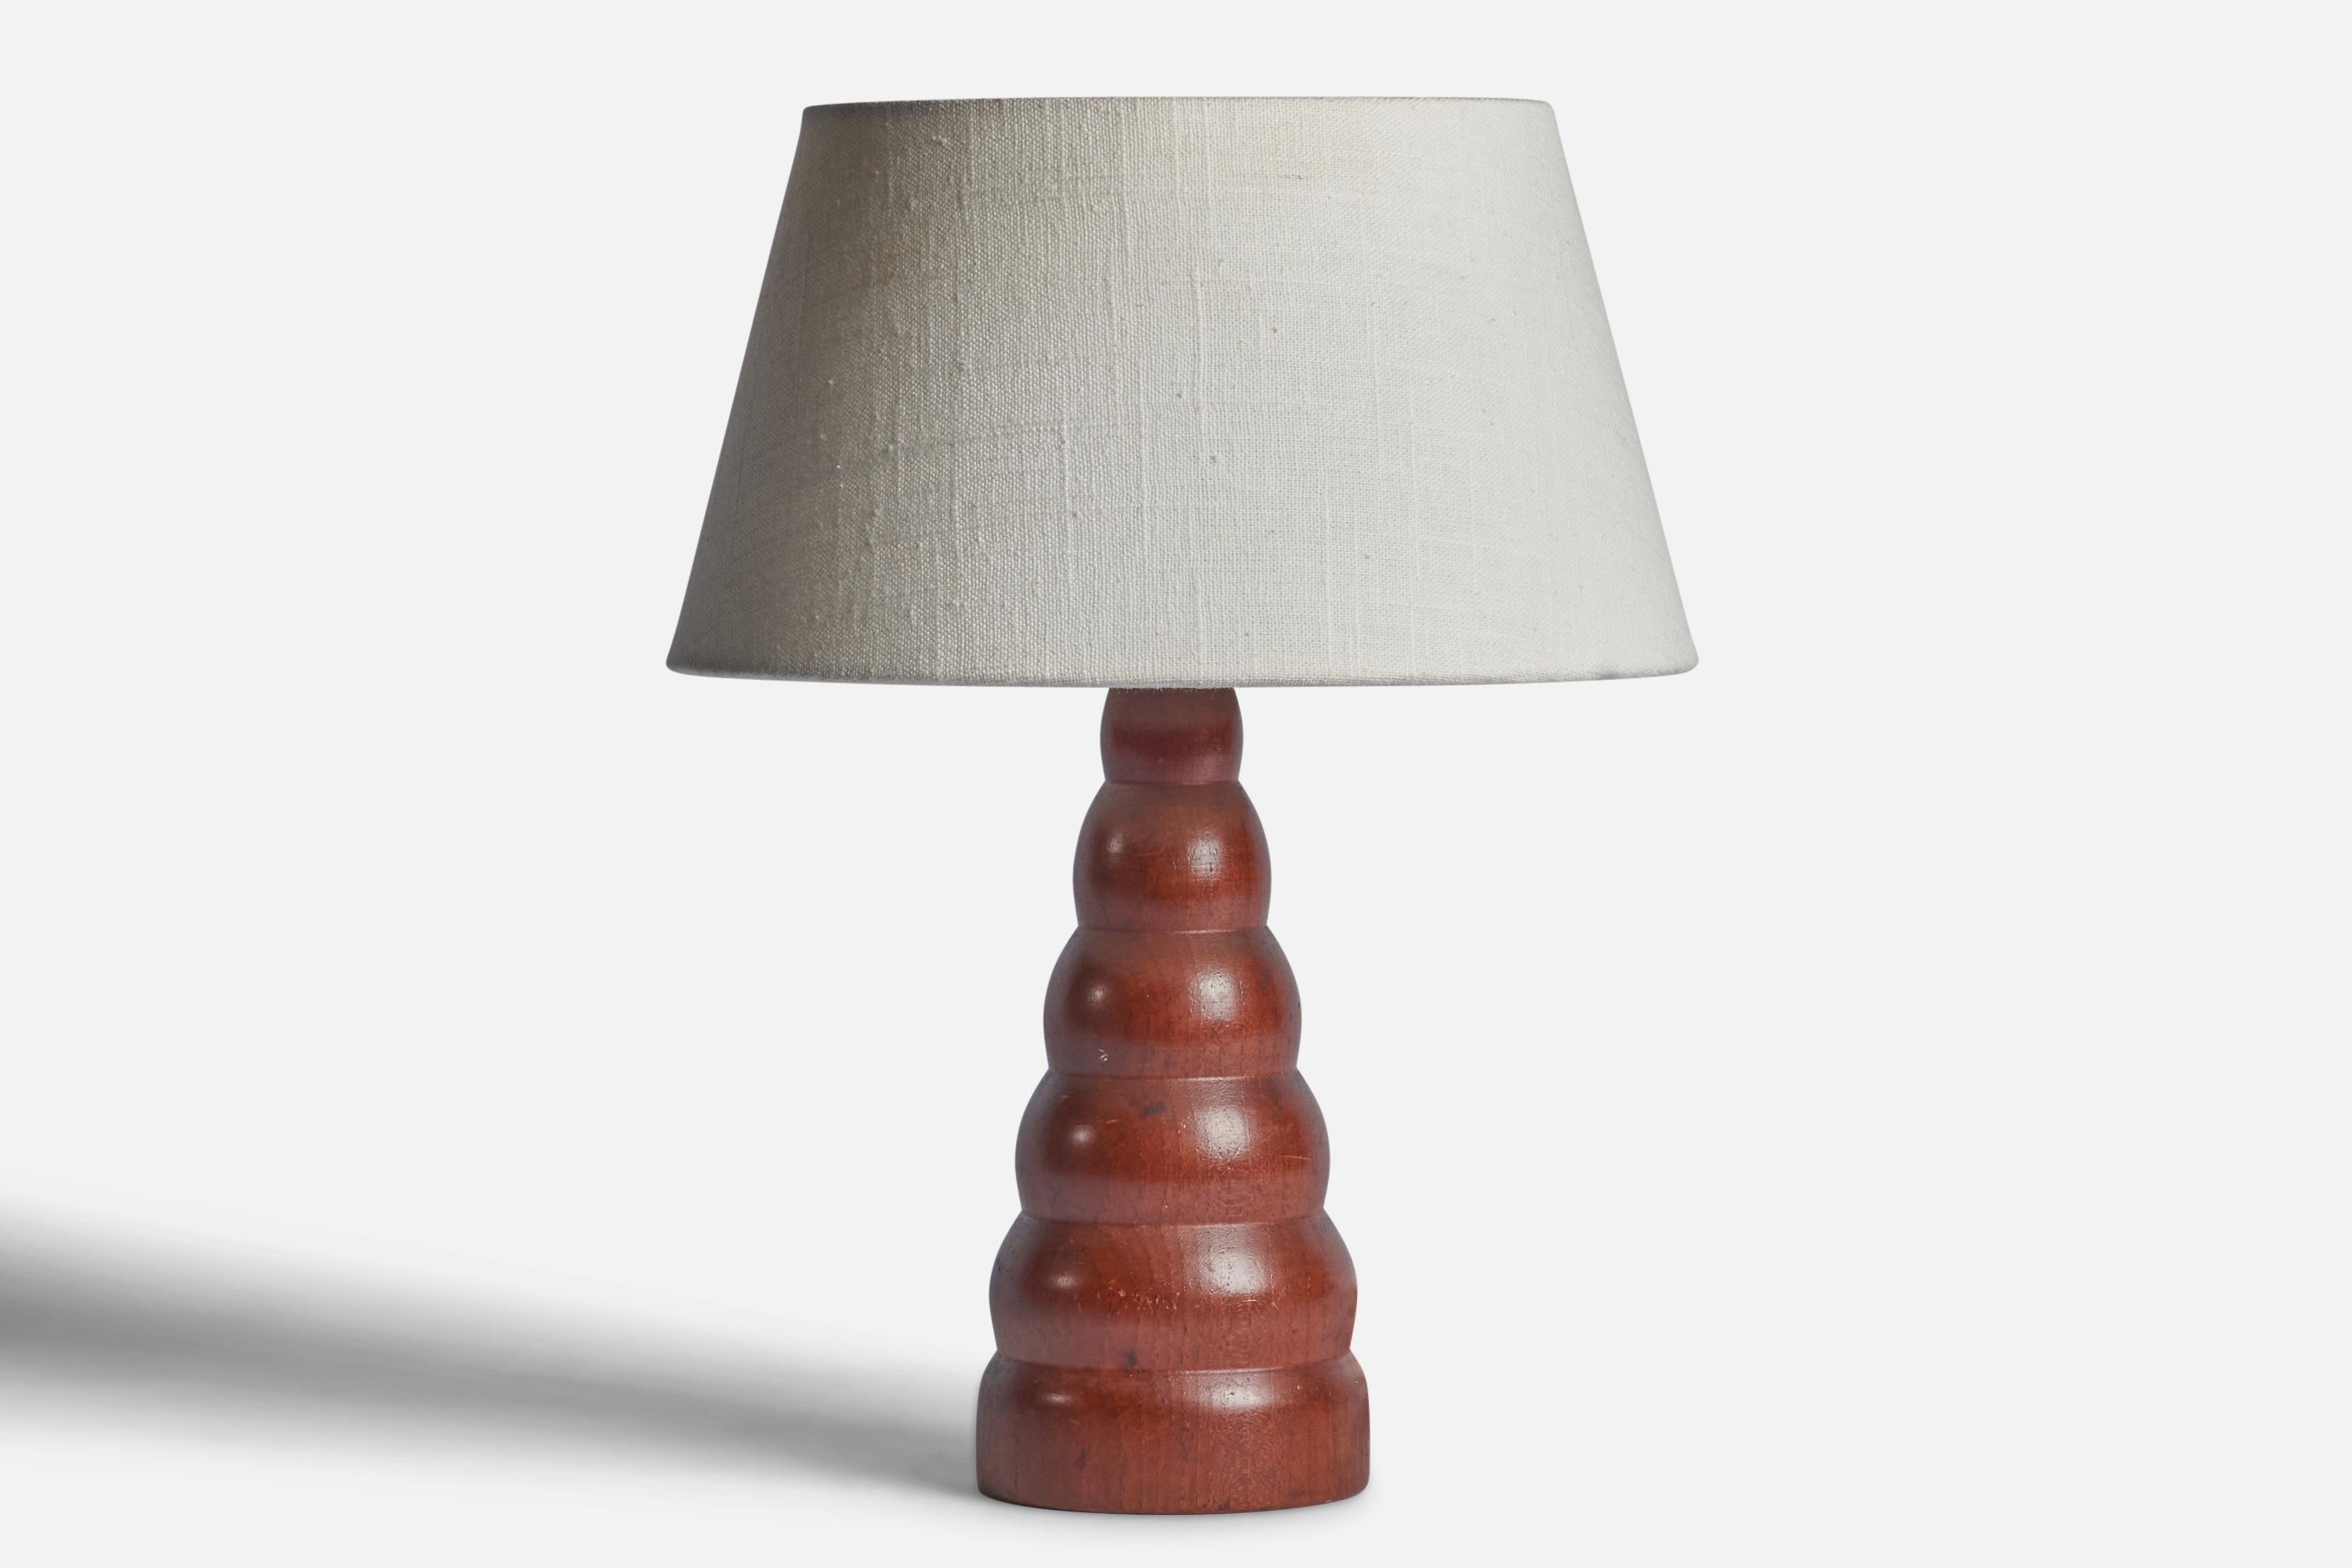 A teak table lamp designed and produced in Sweden, c. 1950s.

Dimensions of Lamp (inches): 10.75” H x 5.75” Diameter
Dimensions of Shade (inches): 7” Top Diameter x 10” Bottom Diameter x 5.5” H 
Dimensions of Lamp with Shade (inches): 13.65” H x 10”